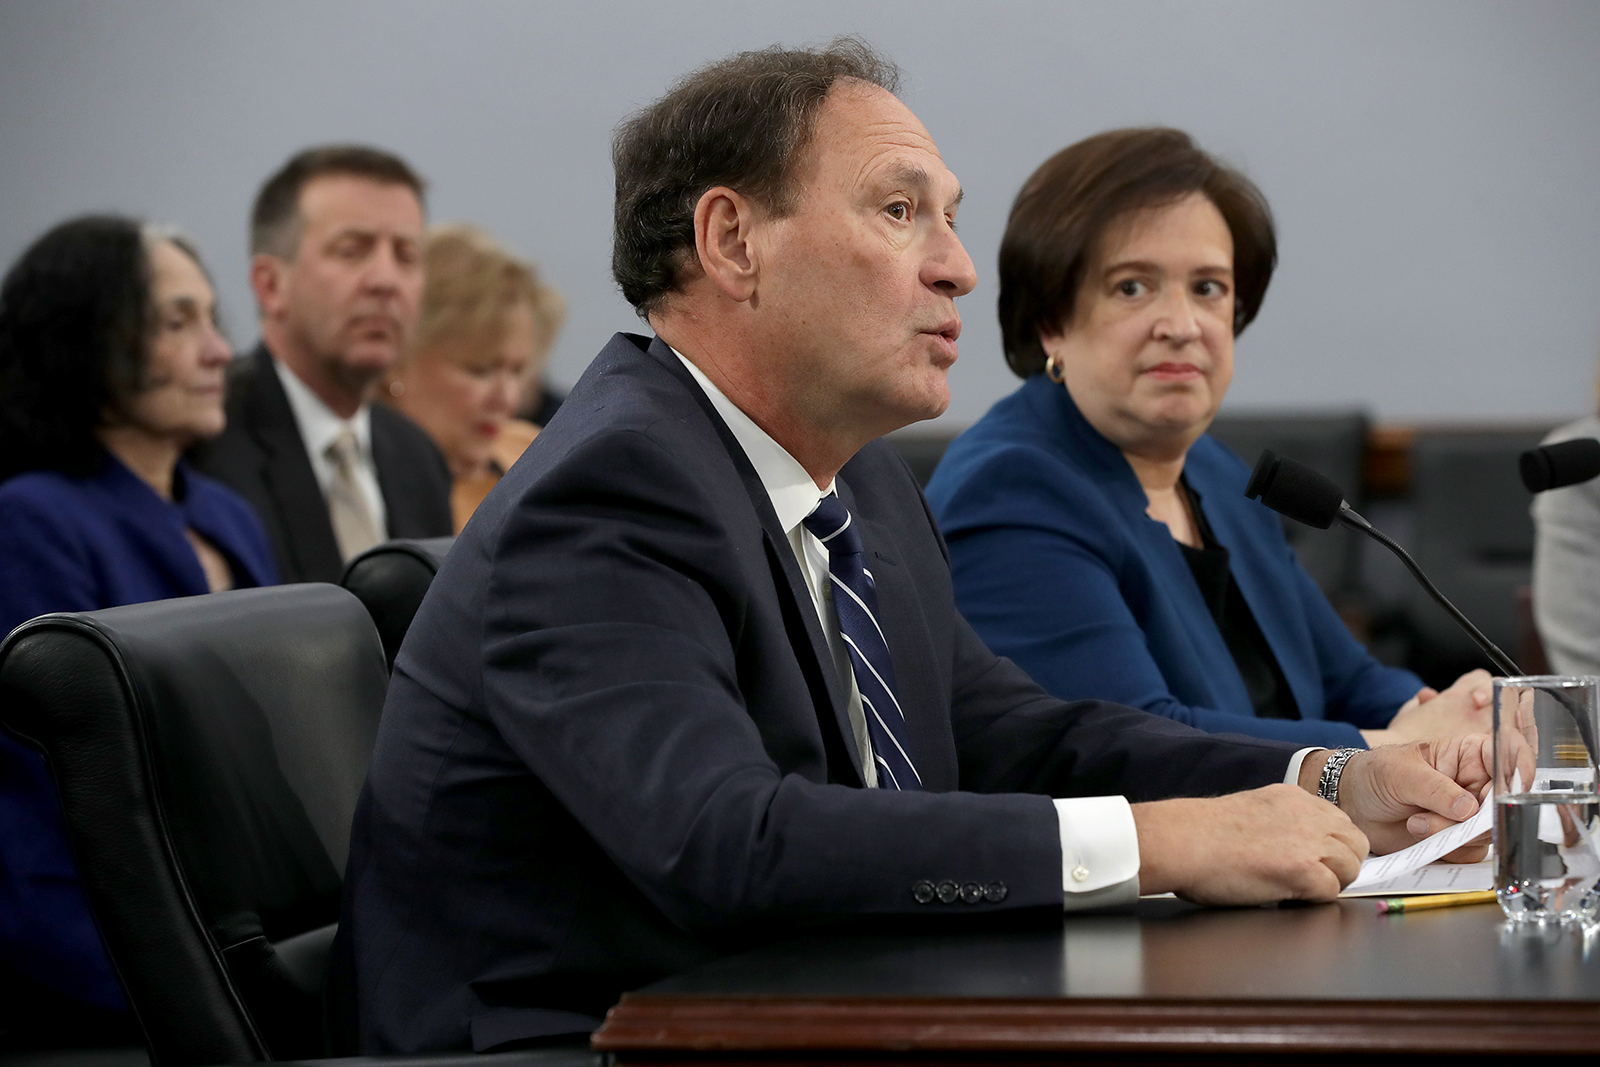 Supreme Court associate justices Samuel Alito, left, and Elana Kagan testify about the court's budget during a hearing of the House Appropriations Committee's Financial Services and General Government Subcommittee, in Washinton, D.C. on March 07, 2019. 